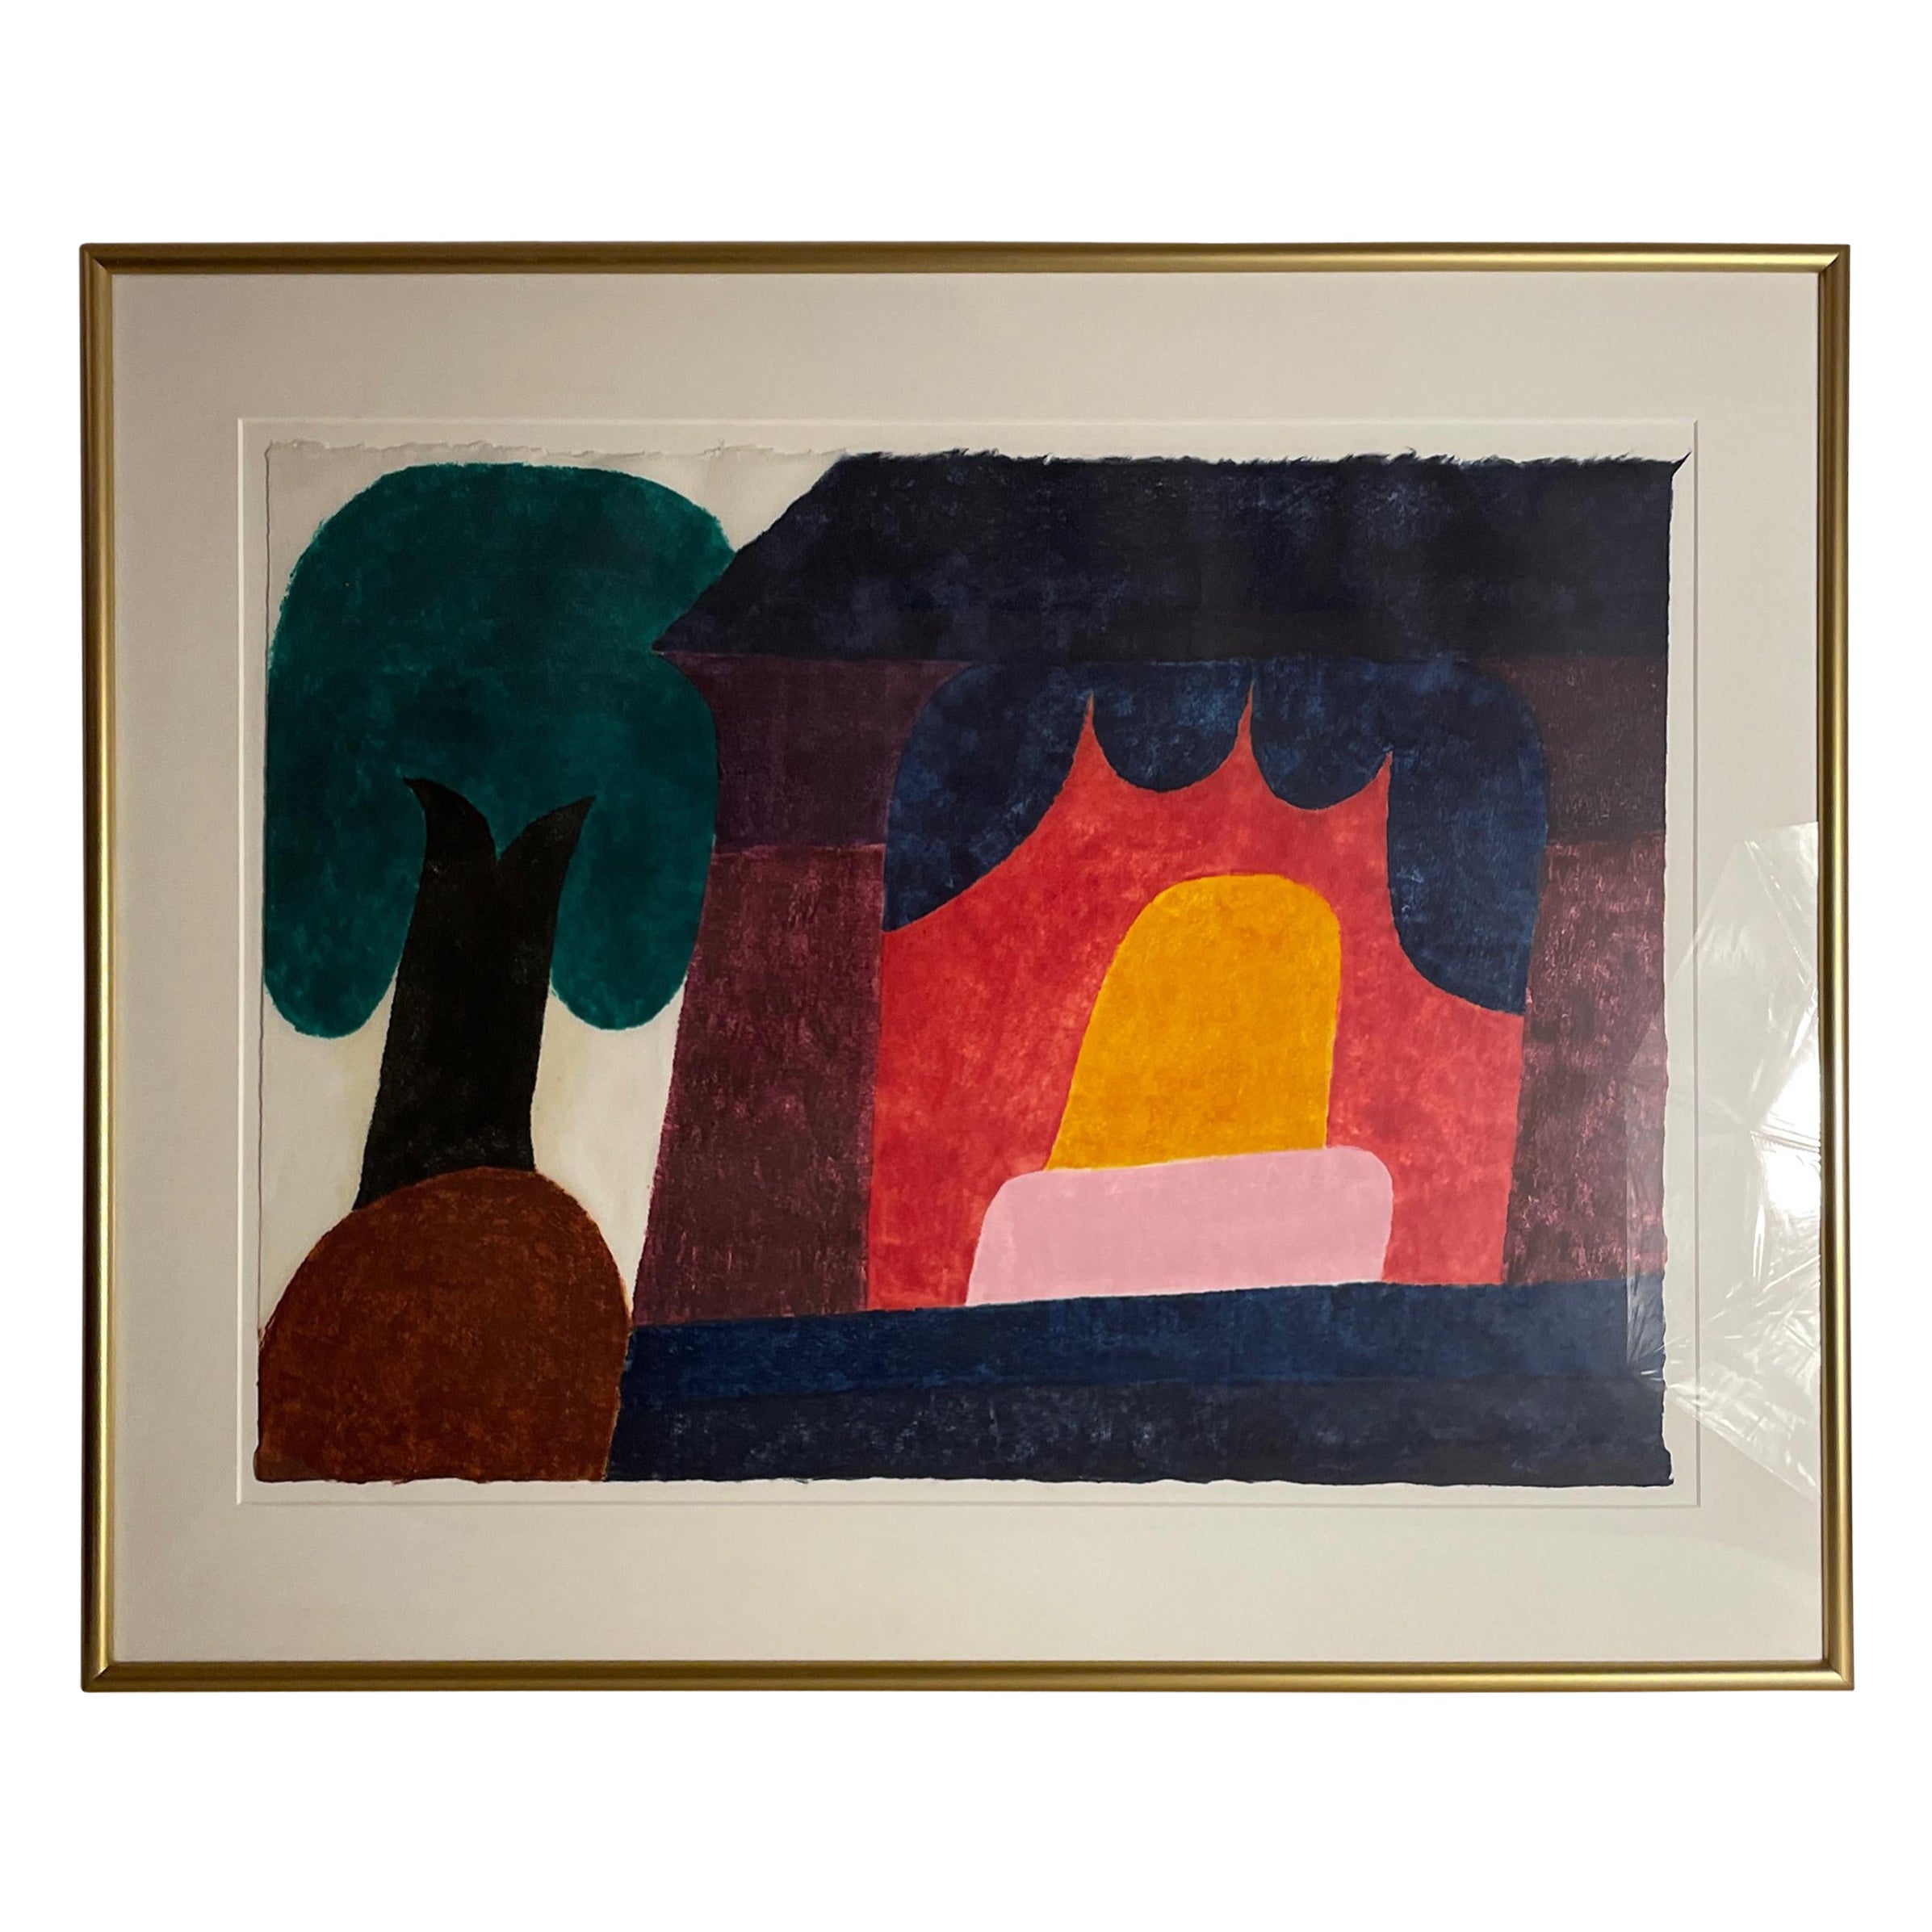 Wood print by Carol Summers titled “Shrines”